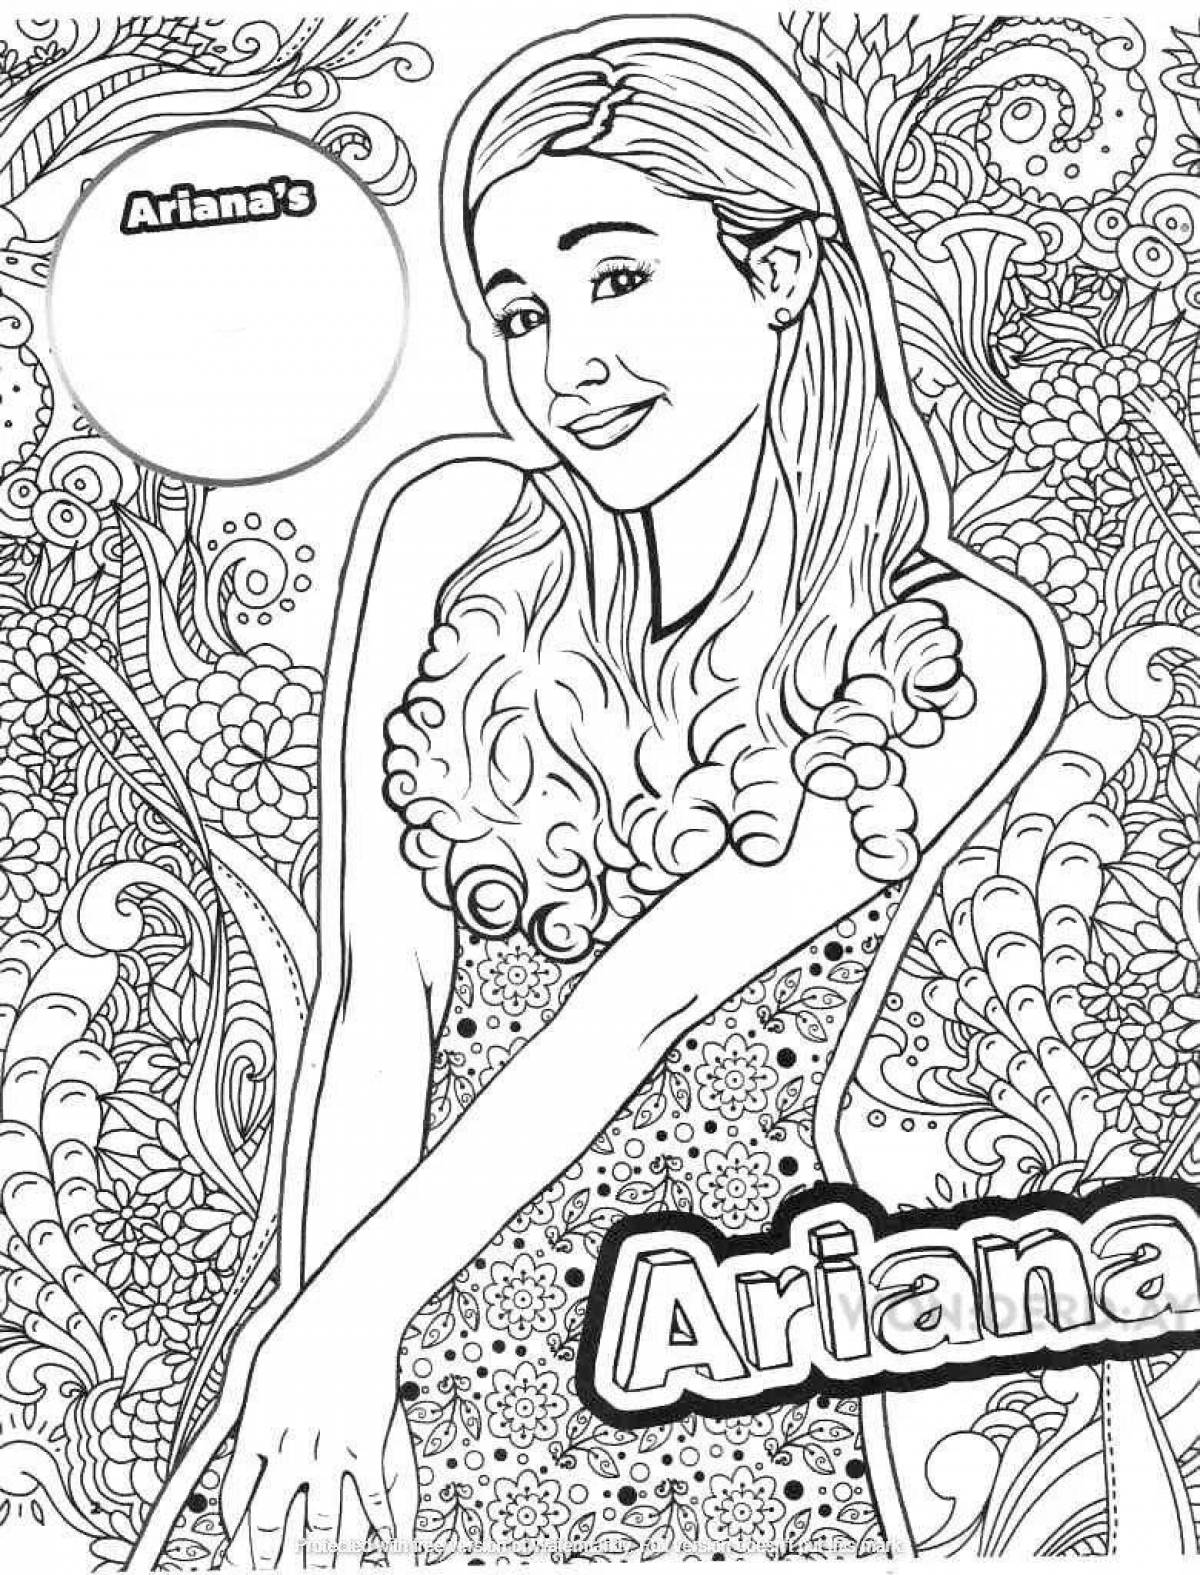 Ariana Grande's gorgeous coloring book